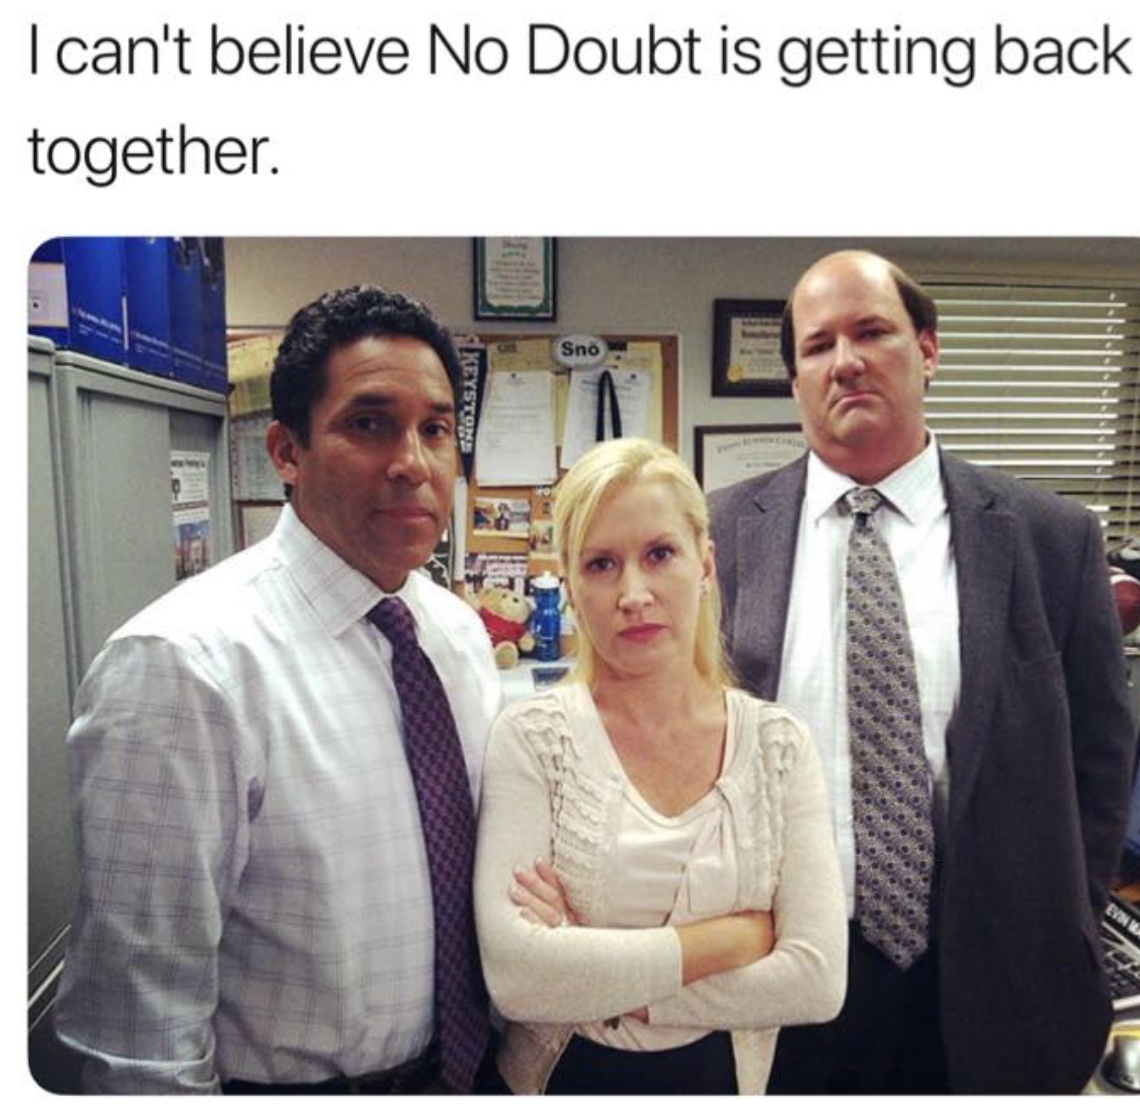 accounting the office - I can't believe No Doubt is getting back together. Sno Keystone